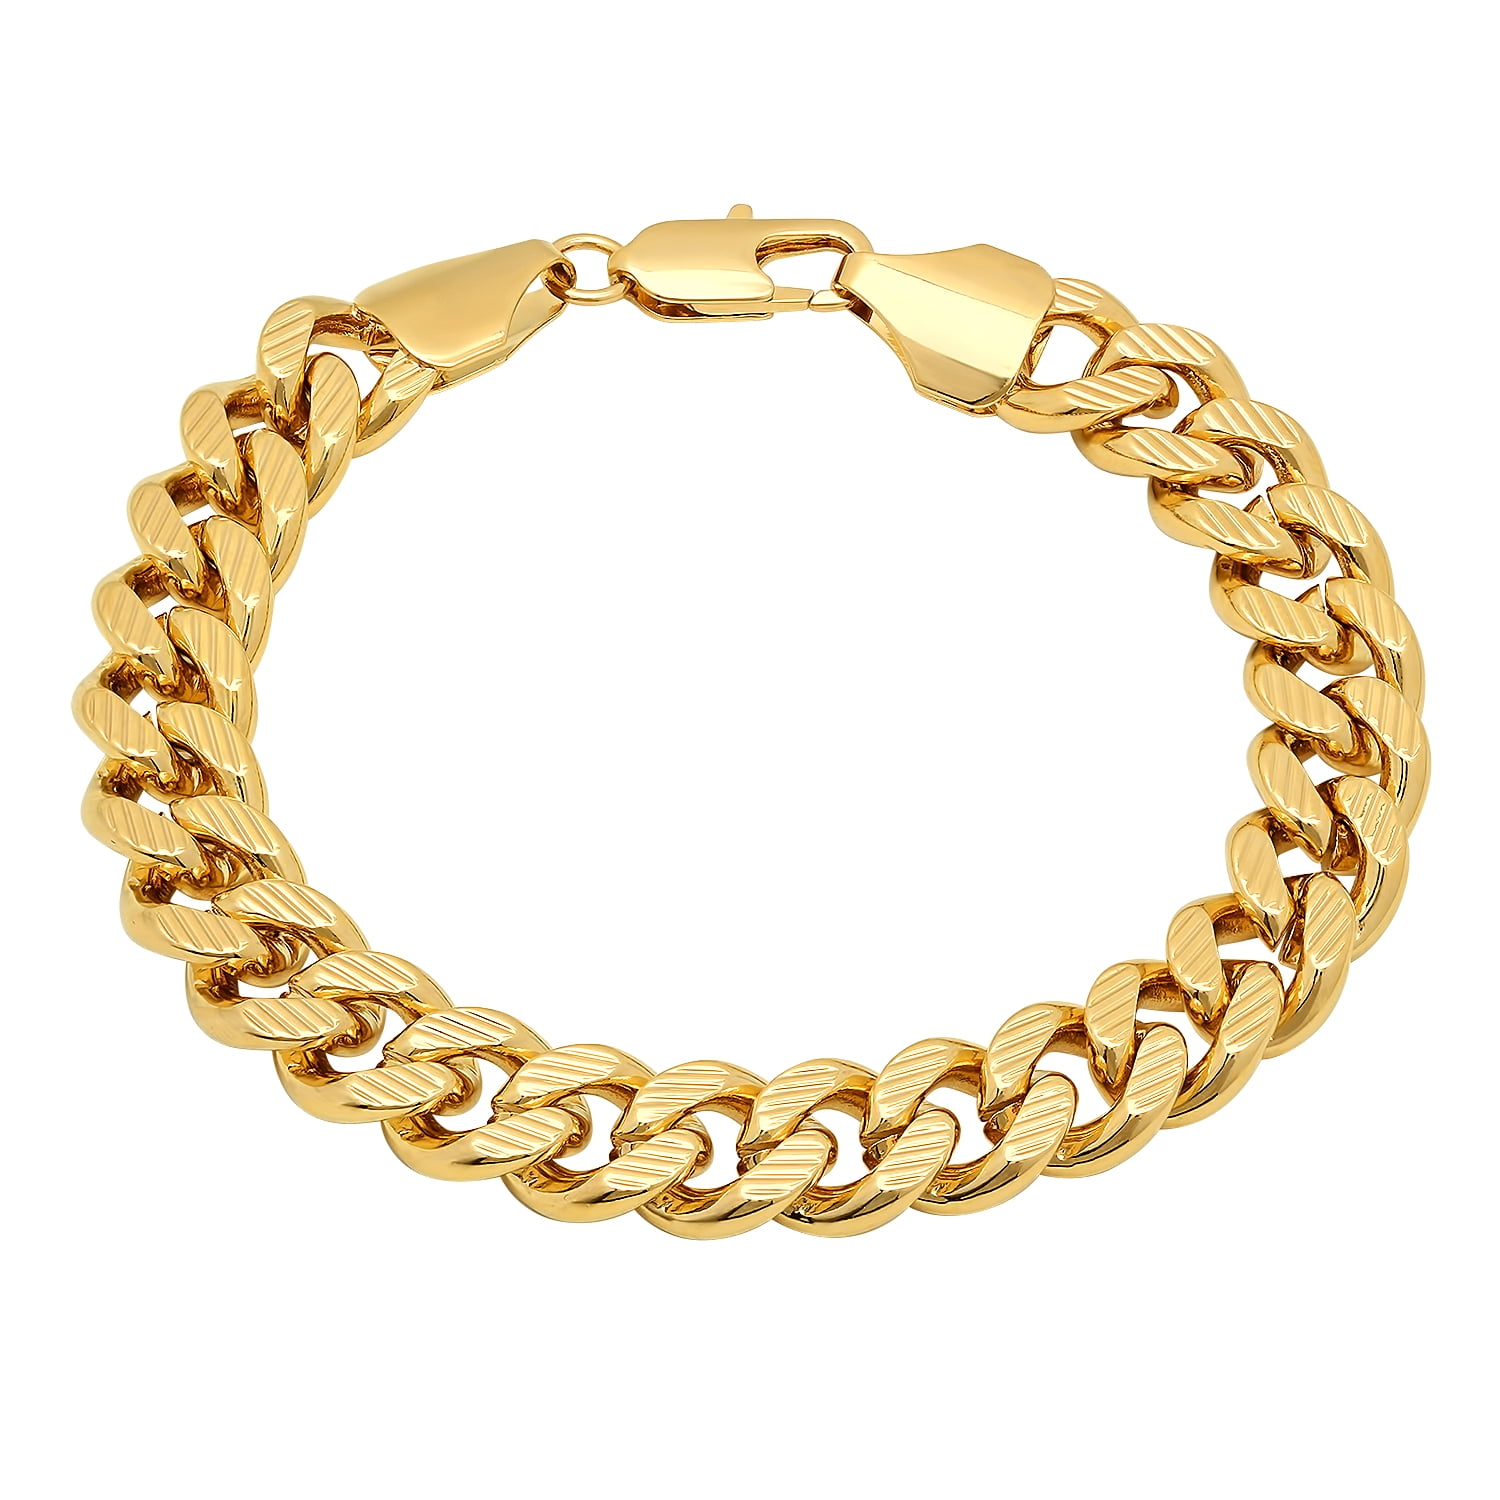 The Bling Factory - 11mm 14k Yellow Gold Plated Flat Miami Cuban Link ...